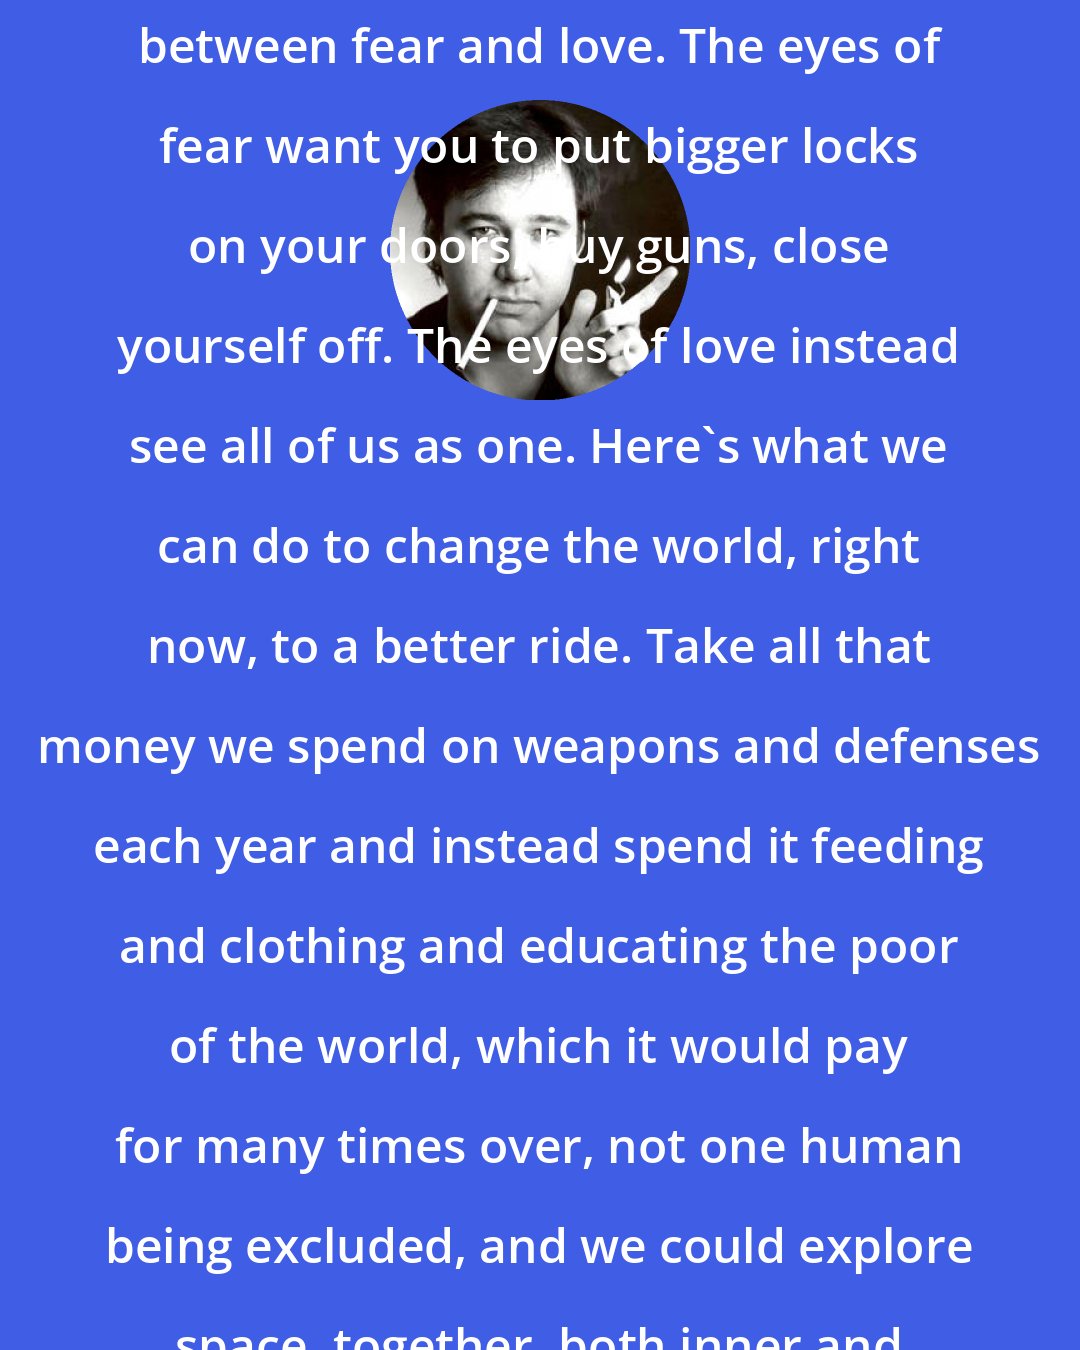 Bill Hicks: Just a simple choice, right now, between fear and love. The eyes of fear want you to put bigger locks on your doors, buy guns, close yourself off. The eyes of love instead see all of us as one. Here's what we can do to change the world, right now, to a better ride. Take all that money we spend on weapons and defenses each year and instead spend it feeding and clothing and educating the poor of the world, which it would pay for many times over, not one human being excluded, and we could explore space, together, both inner and outer, forever, in peace.